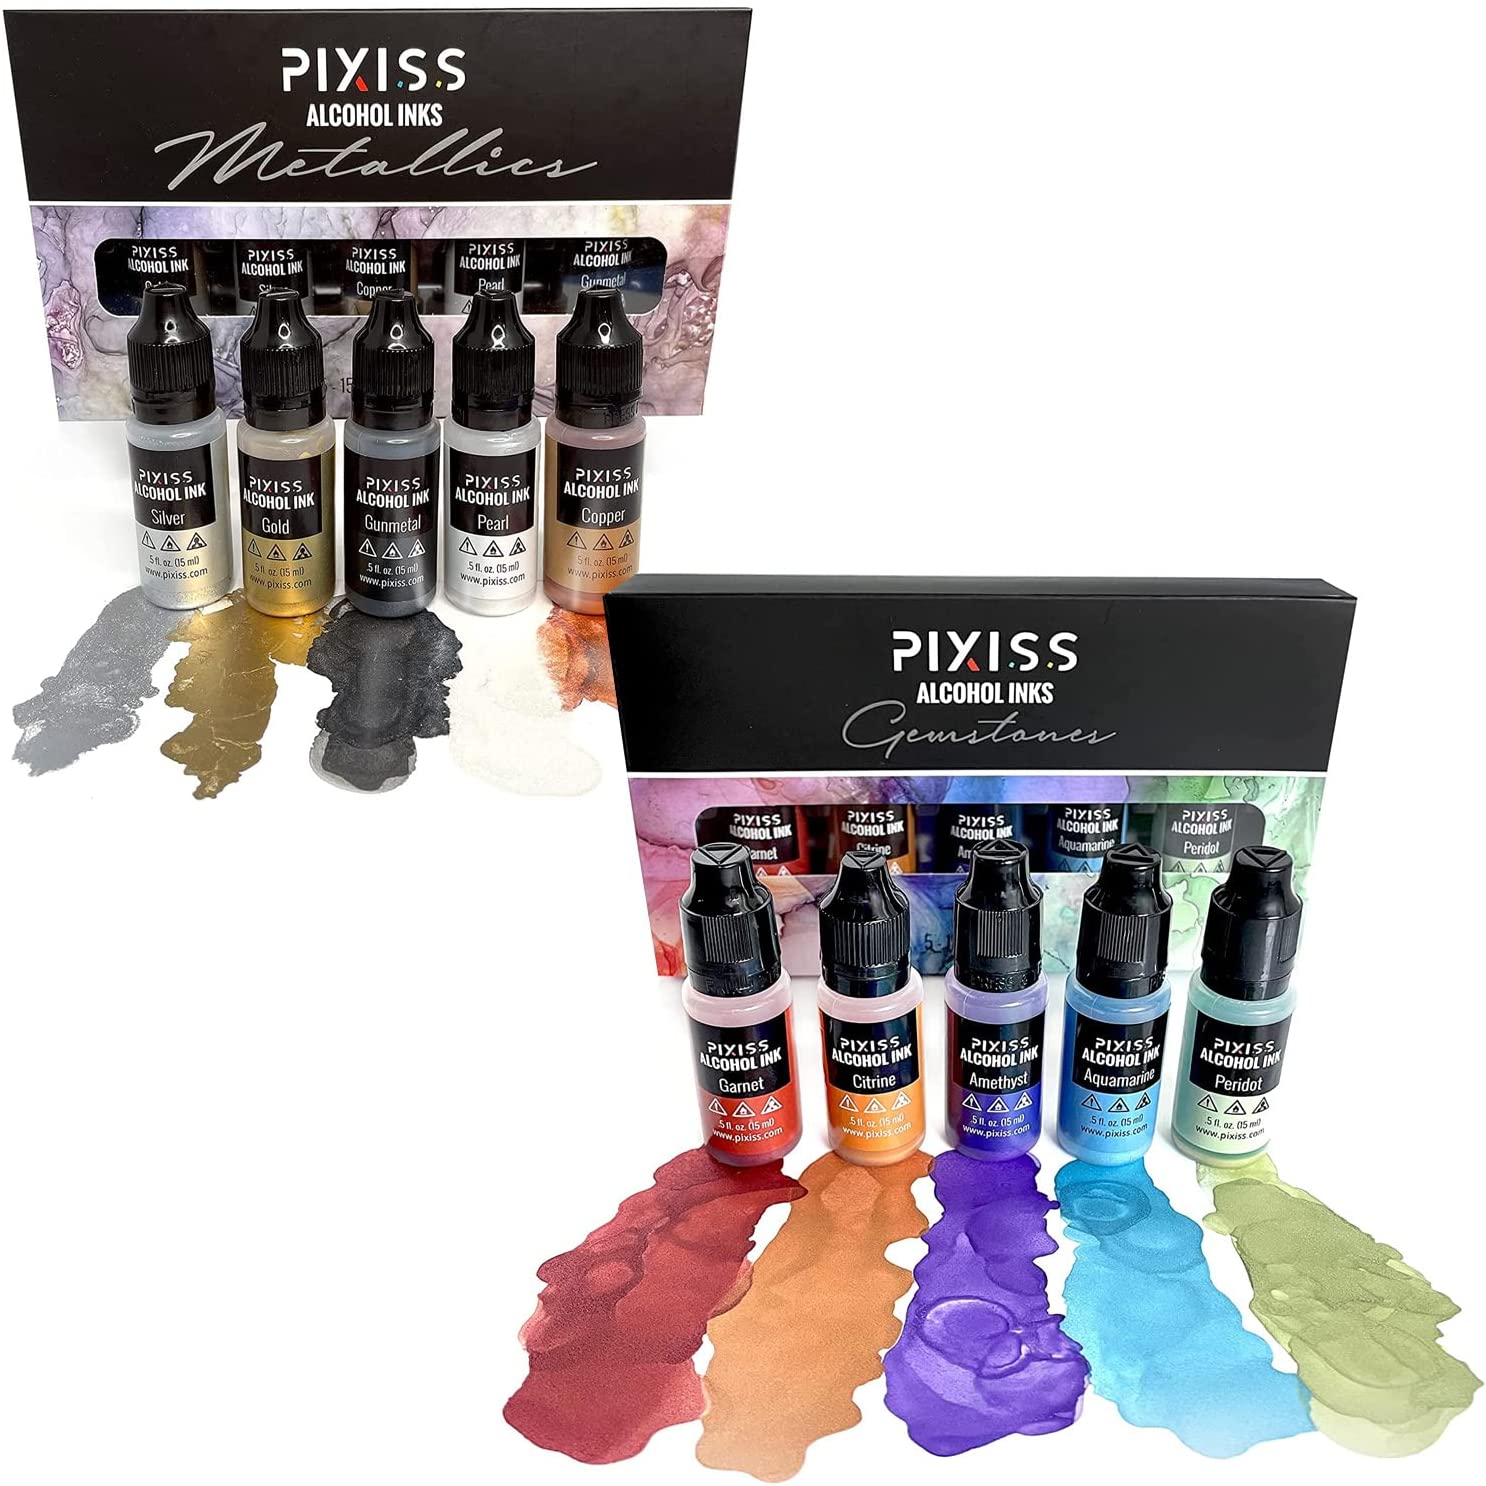 Pixiss Reds Alcohol Inks Set, 5 Highly Saturated Red Alcohol Inks